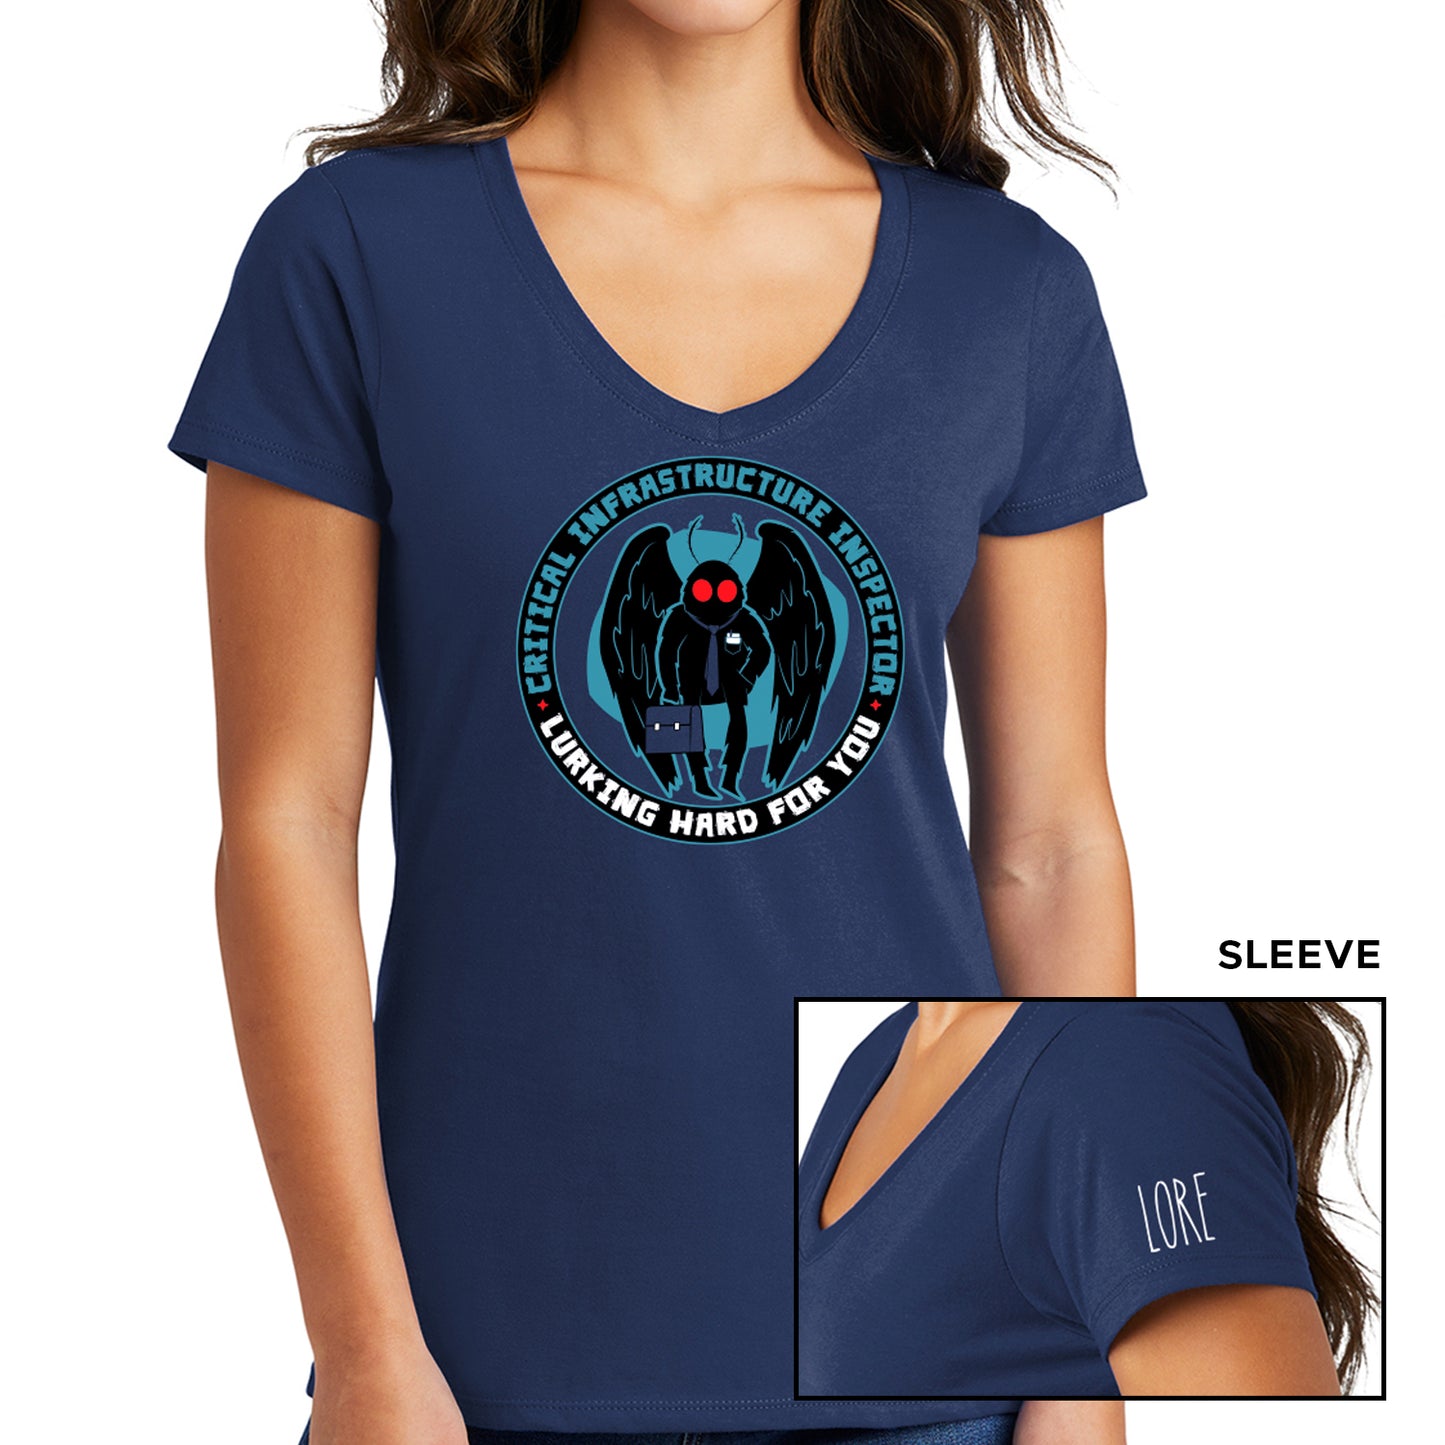 A female model wearing a navy, short-sleeved, V-neck tee. The tee has a black ring/circle printed with the words "Critical infrastructure inspector" in dark blue font and "Working hard for you" in white font. Within the ring is a black cartoon Mothman with red eyes, a navy tie, and a navy briefcase set against a lighter shadow. One sleeve features the 'LORE' logo in white.